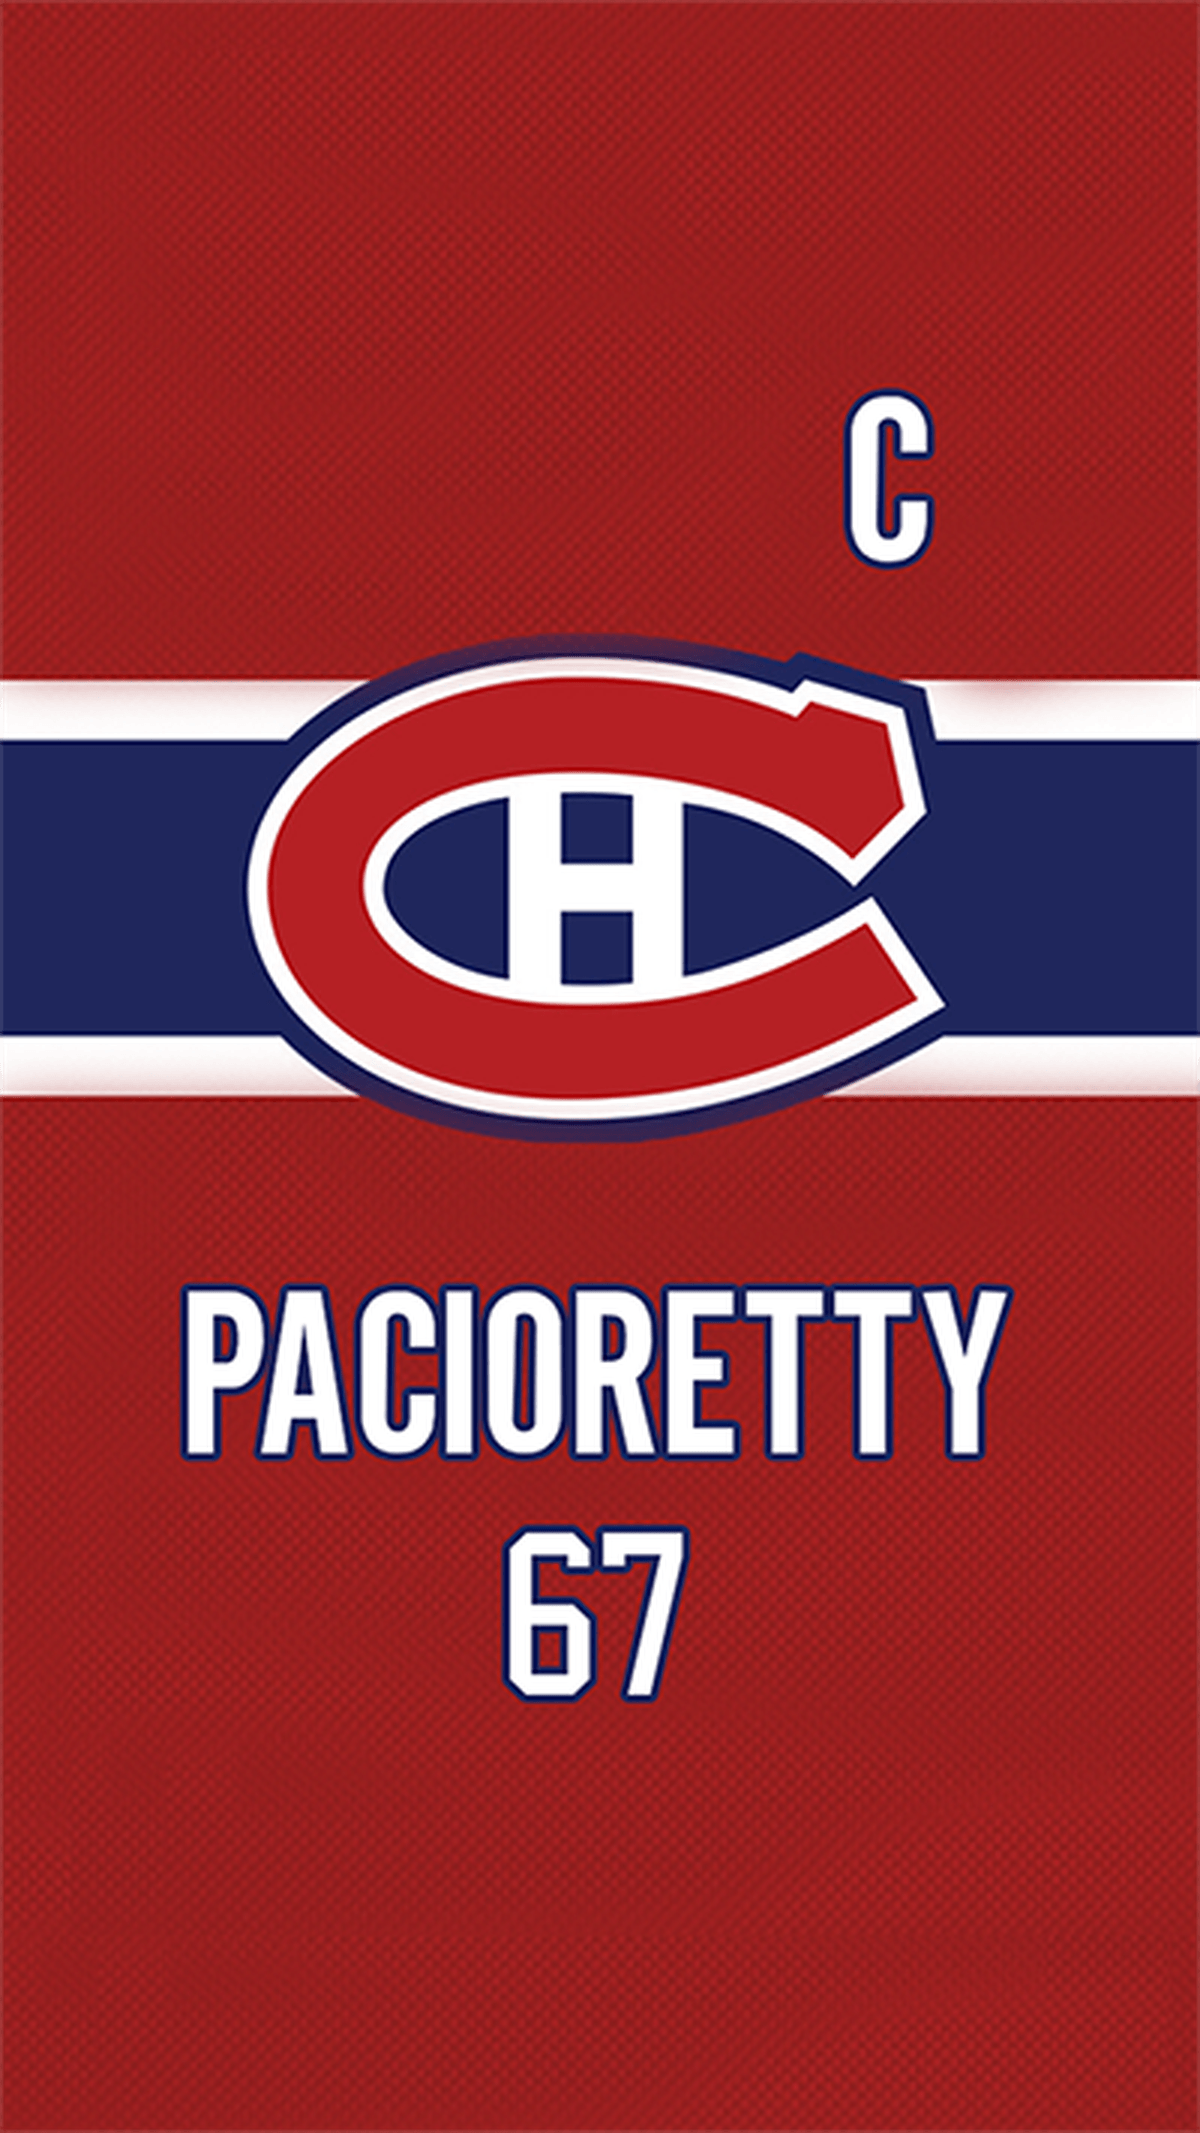 Free Montreal Canadiens smartphone wallpaper On The Prize